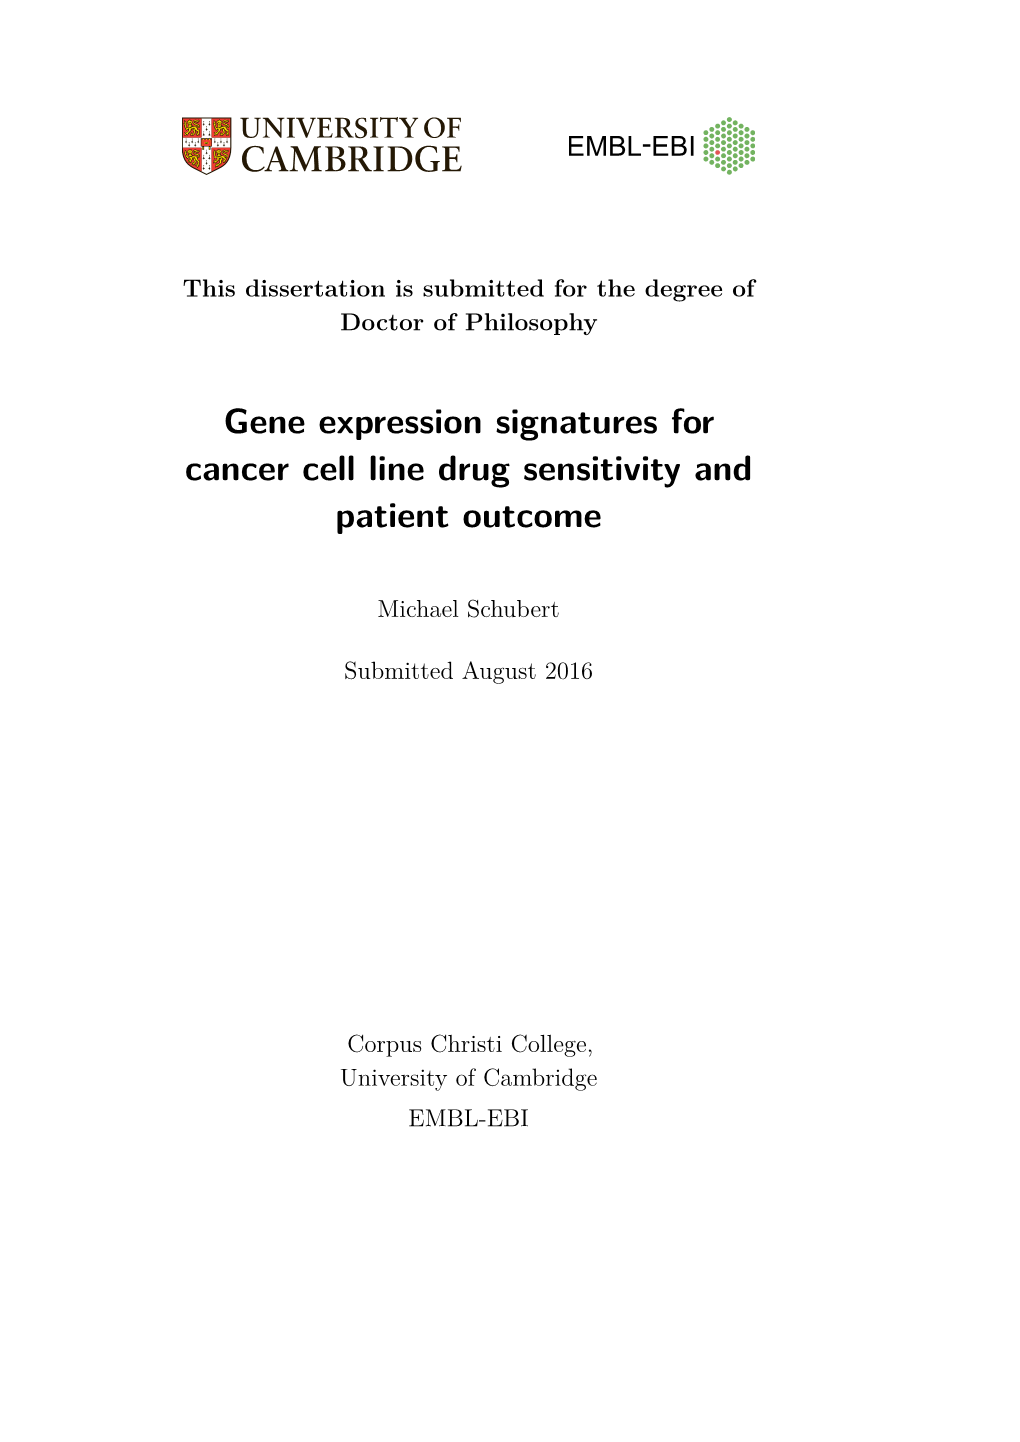 Gene Expression Signatures for Cancer Cell Line Drug Sensitivity and Patient Outcome